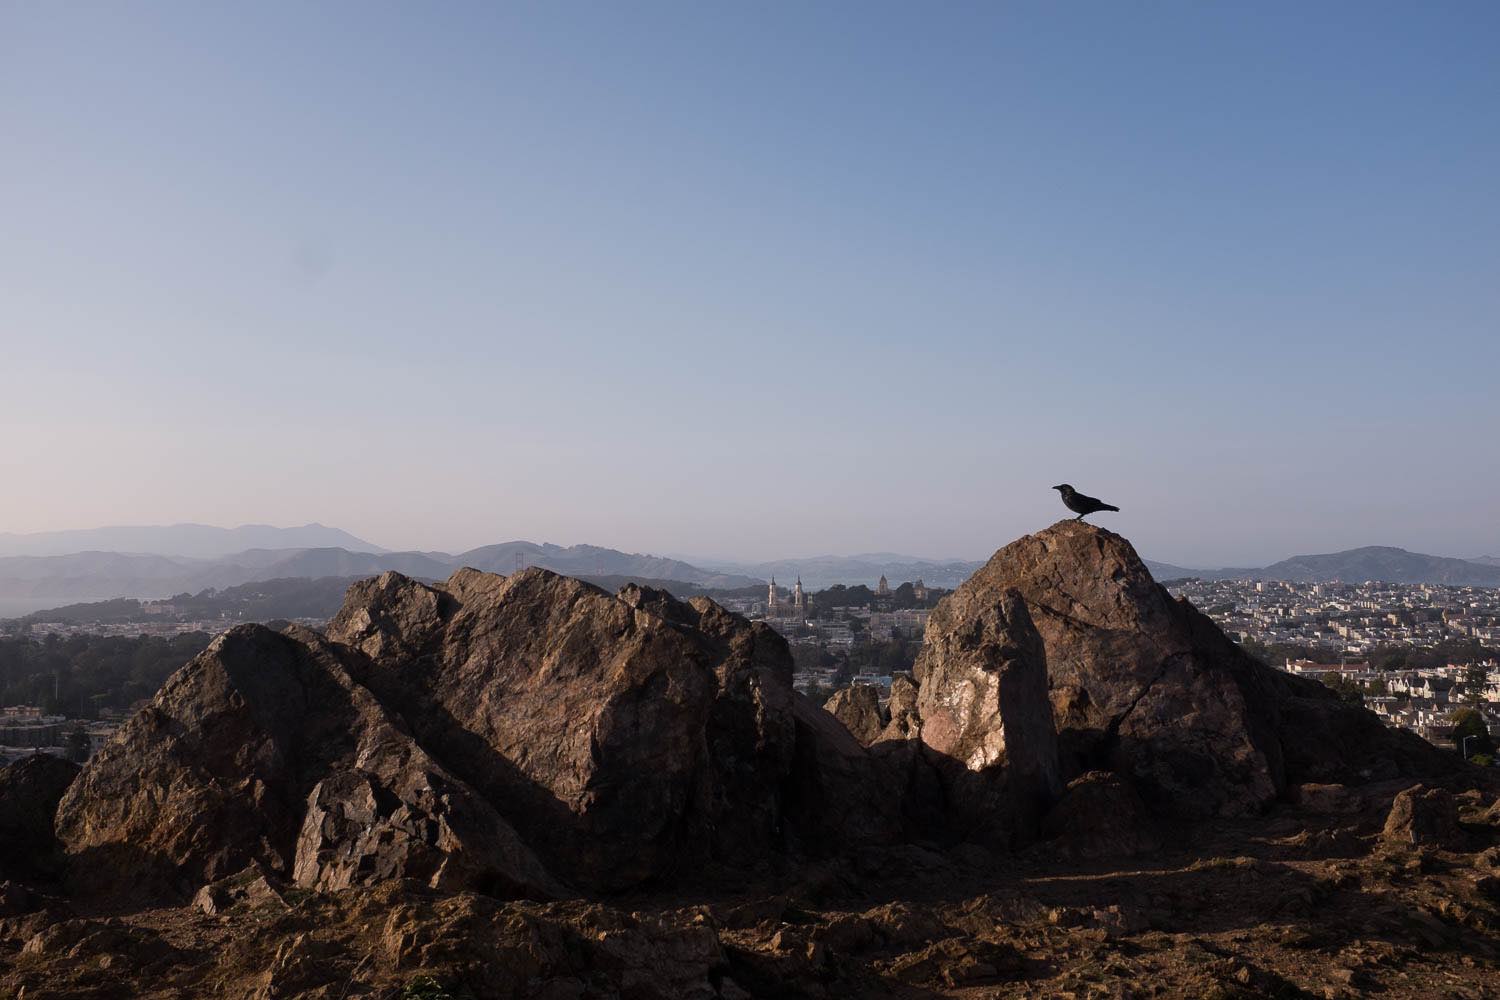 A bird perched on the rocks of Tank Hill overlooking the city of San Francisco